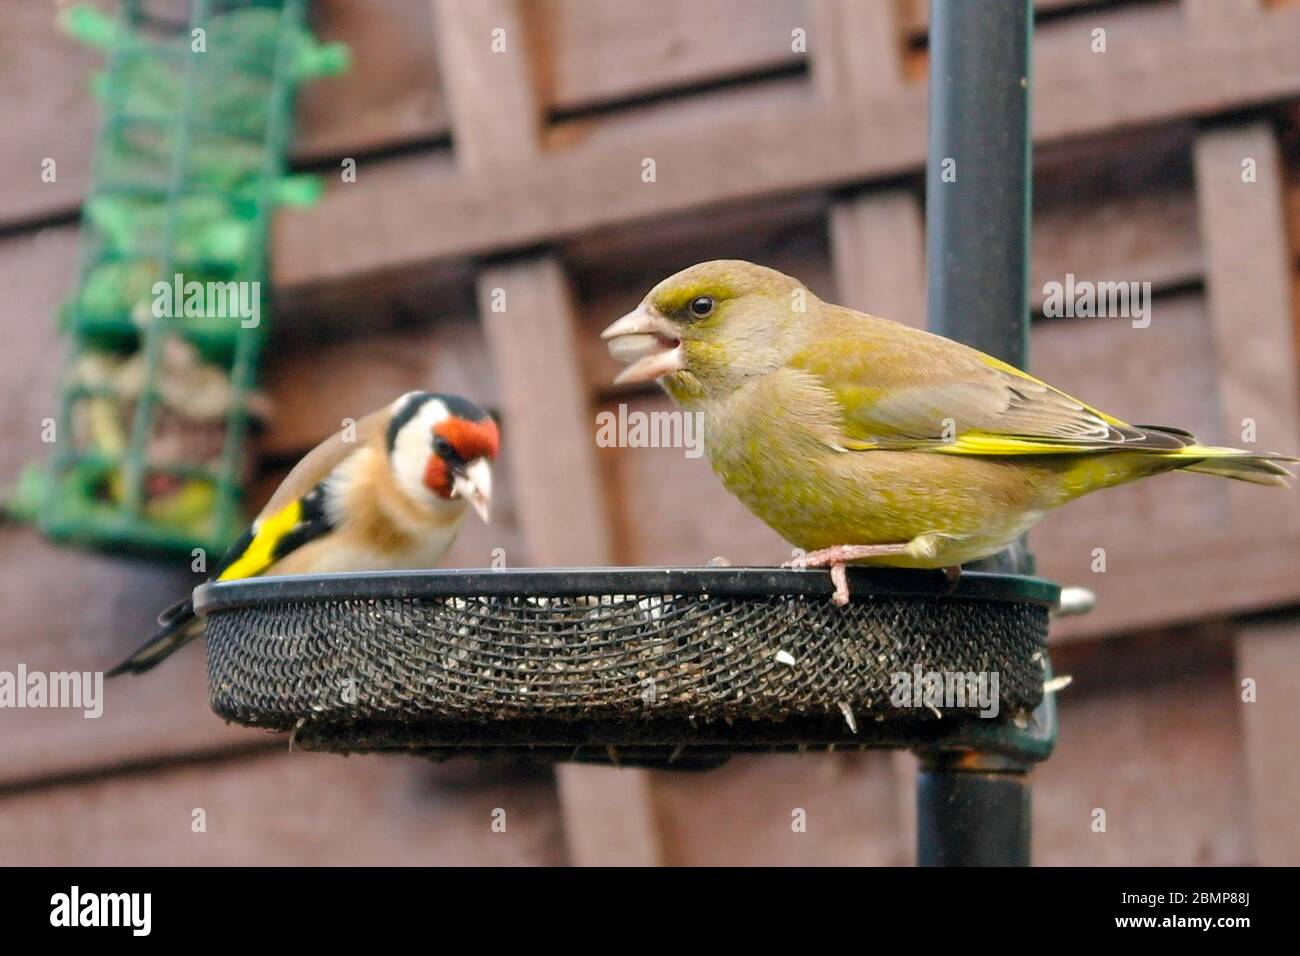 A greenfich and a goldfinch munching on sunflower hearts at the bird feeder. Stock Photo